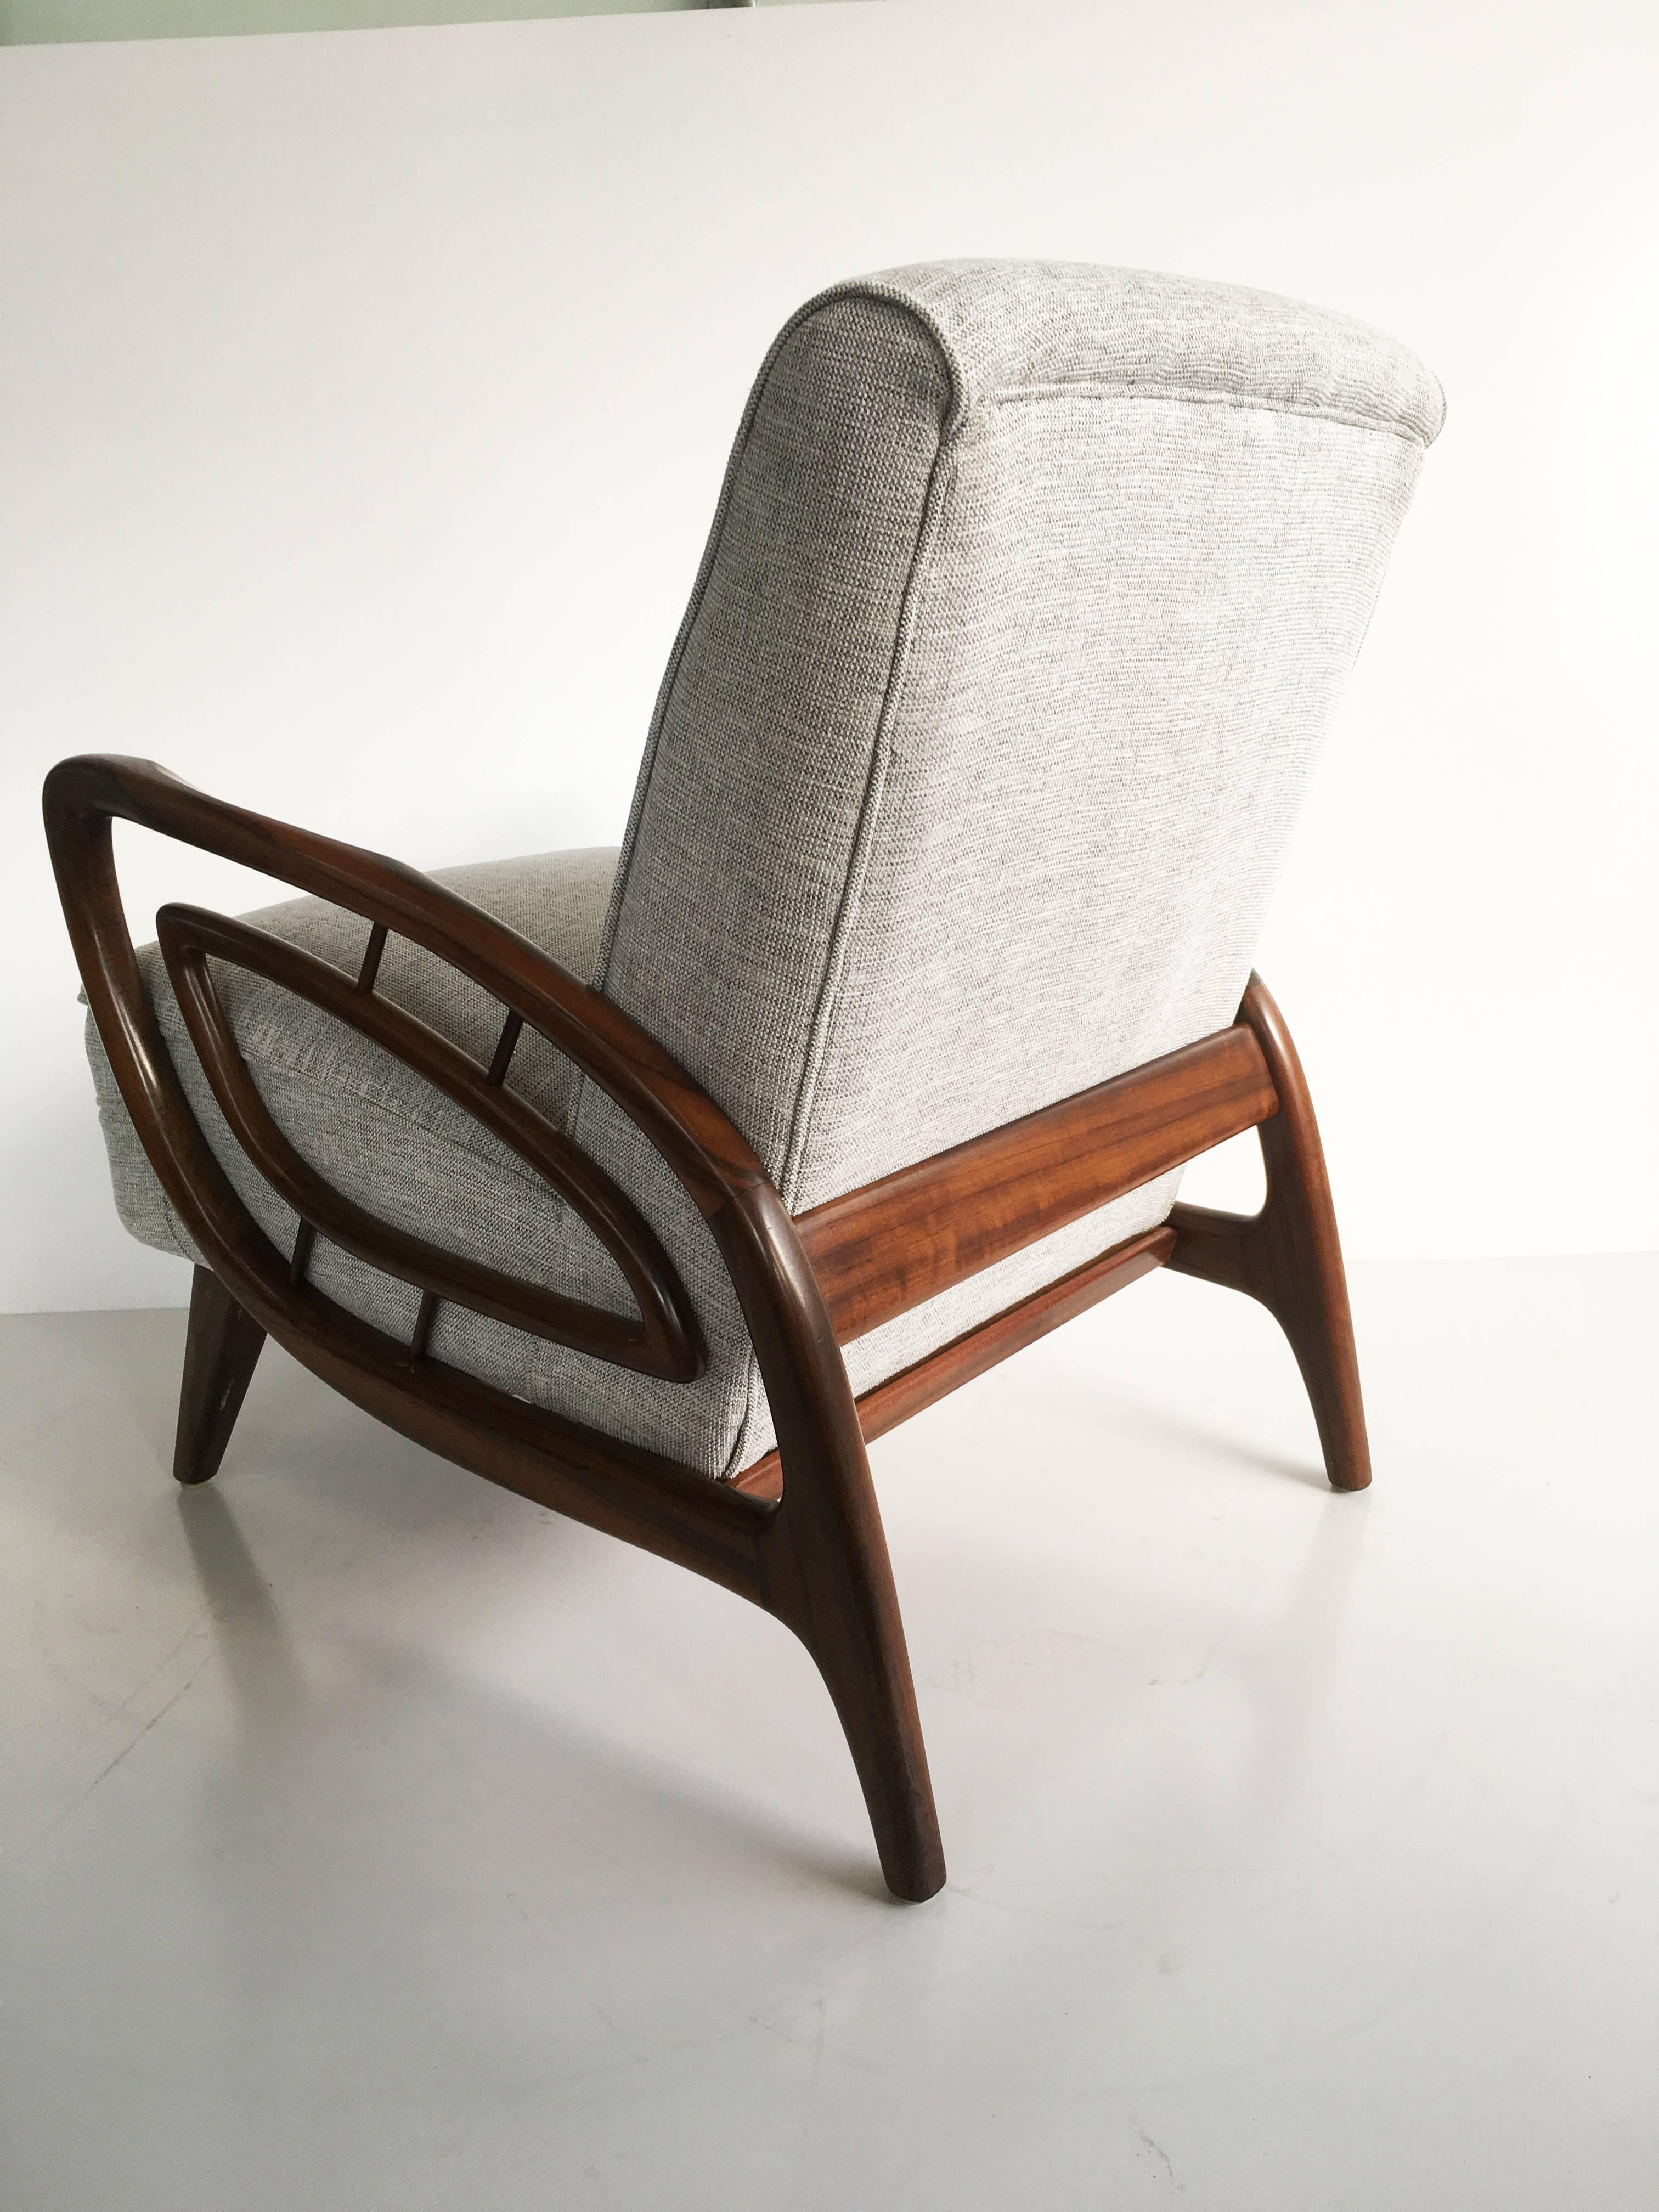 Set of two truly unique Australian Mid-Century armchairs by artisan craftsman Jakob Rudowski, 1960s.

Made of quality Australian walnut with textured grey upholstery. Beautiful sculptural winged arm detail.